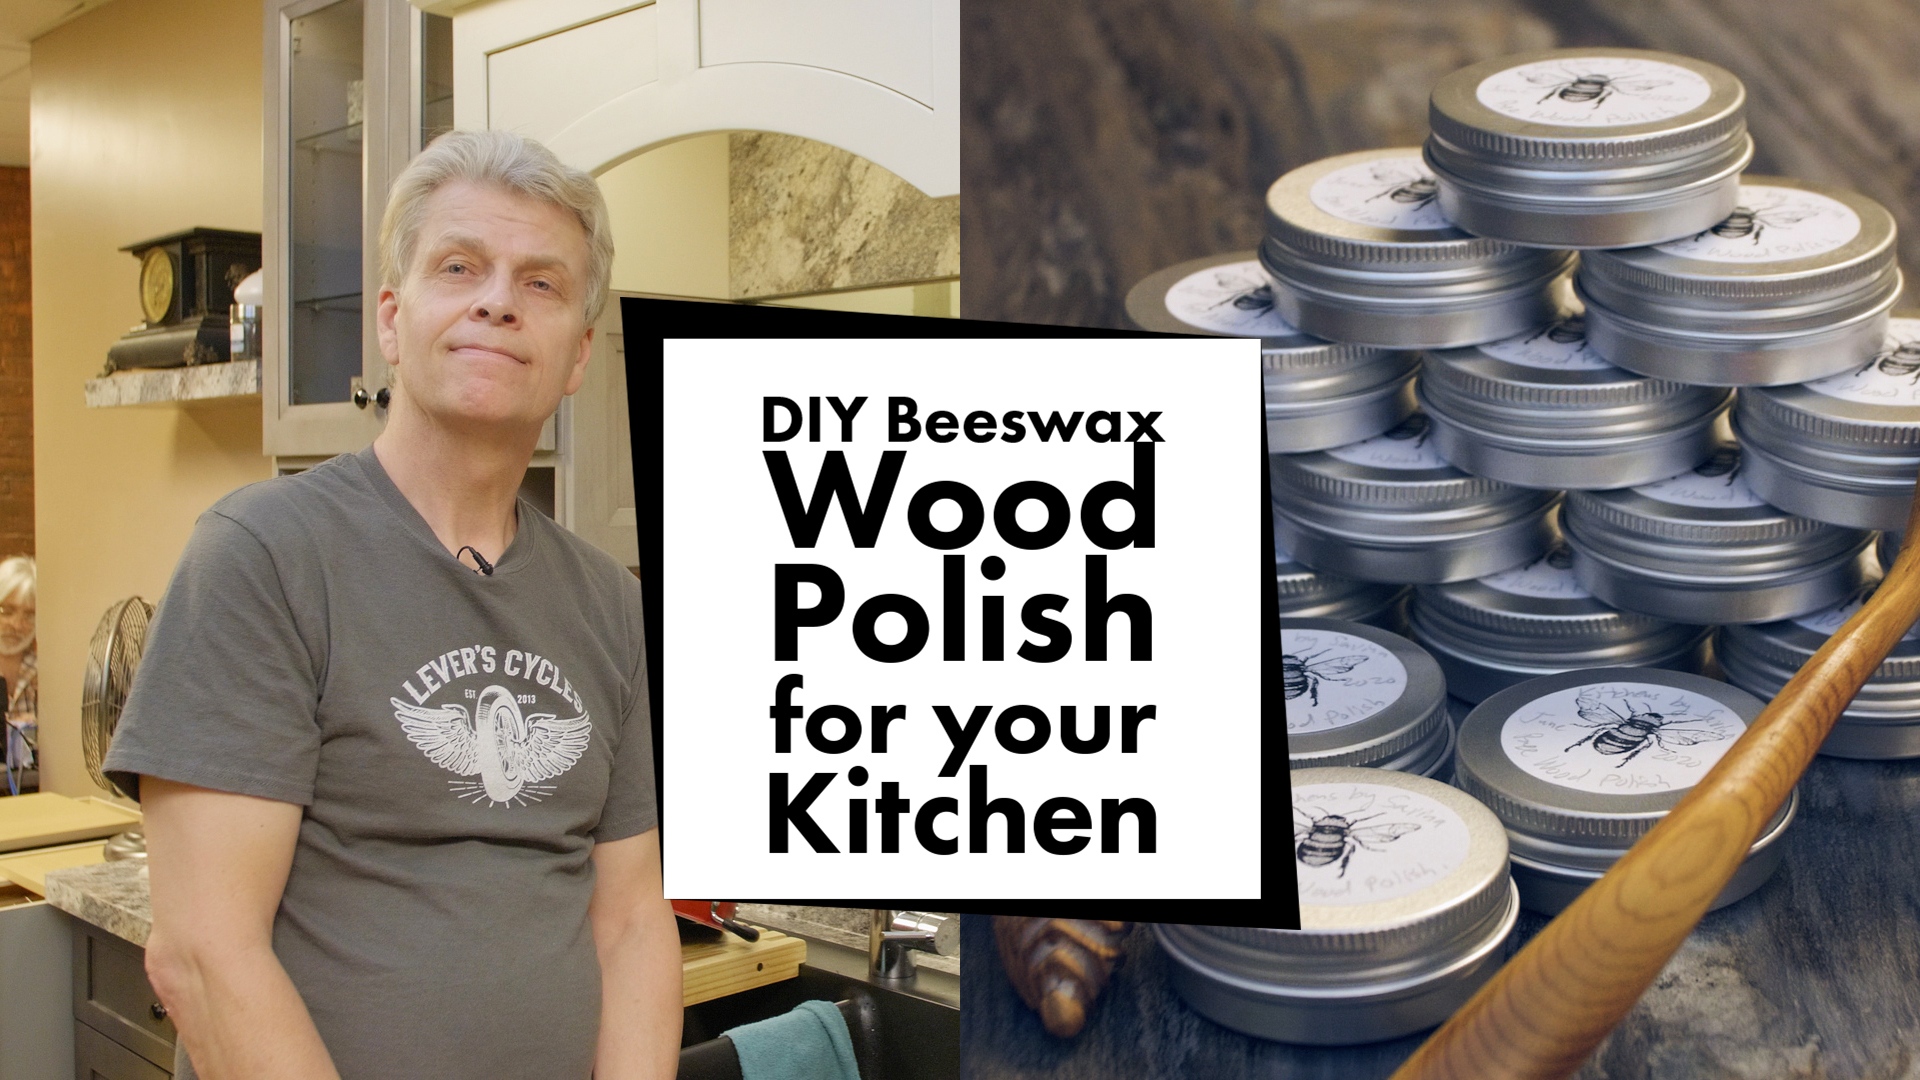 DIY Beeswax Wood Polish for your Kitchen